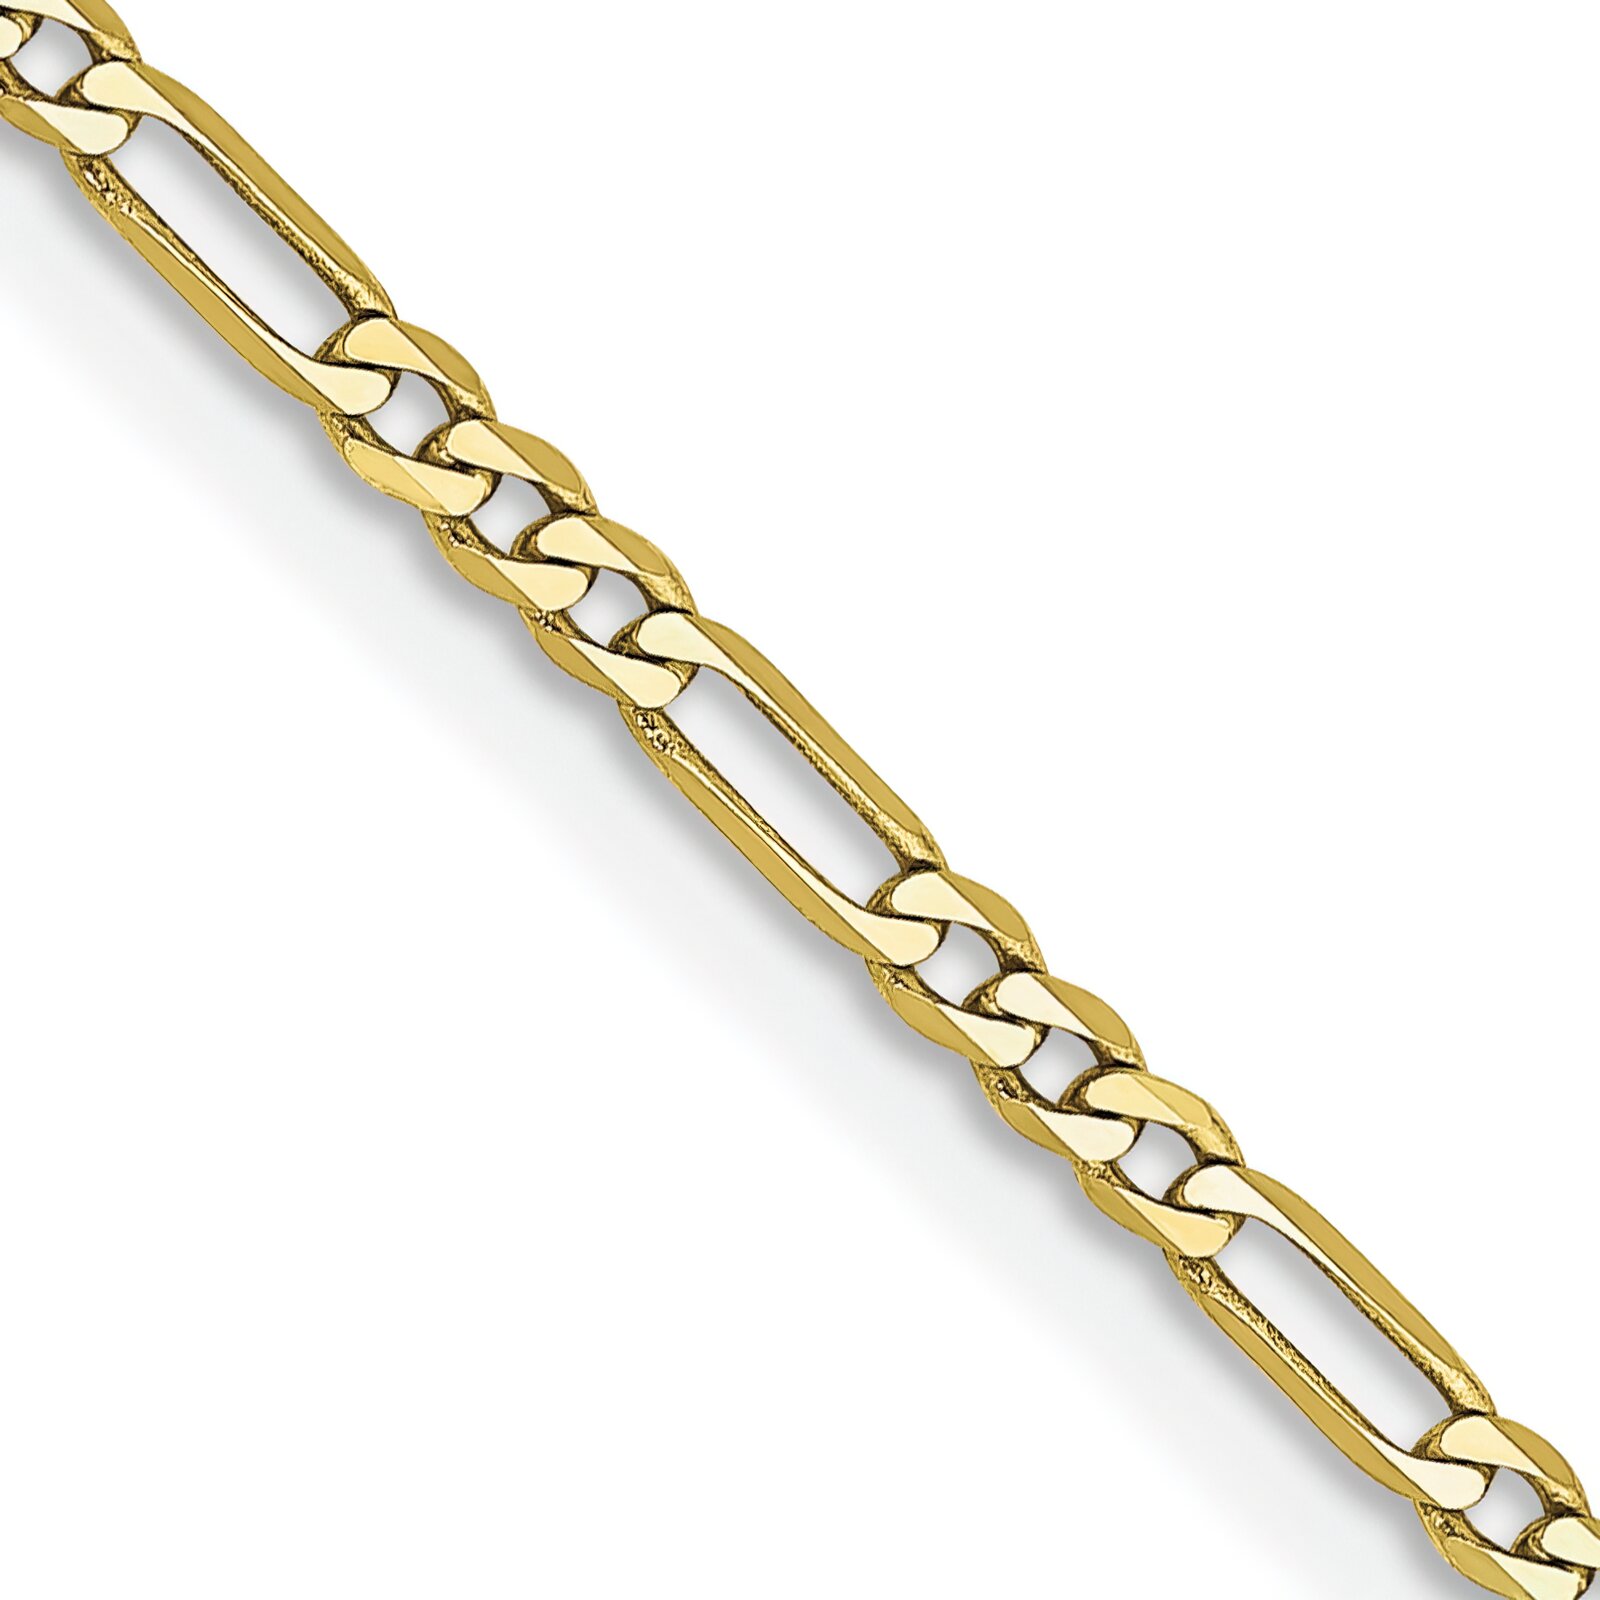 Findingking 10K Gold 1.75mm Figaro Chain Necklace Jewelry 20"